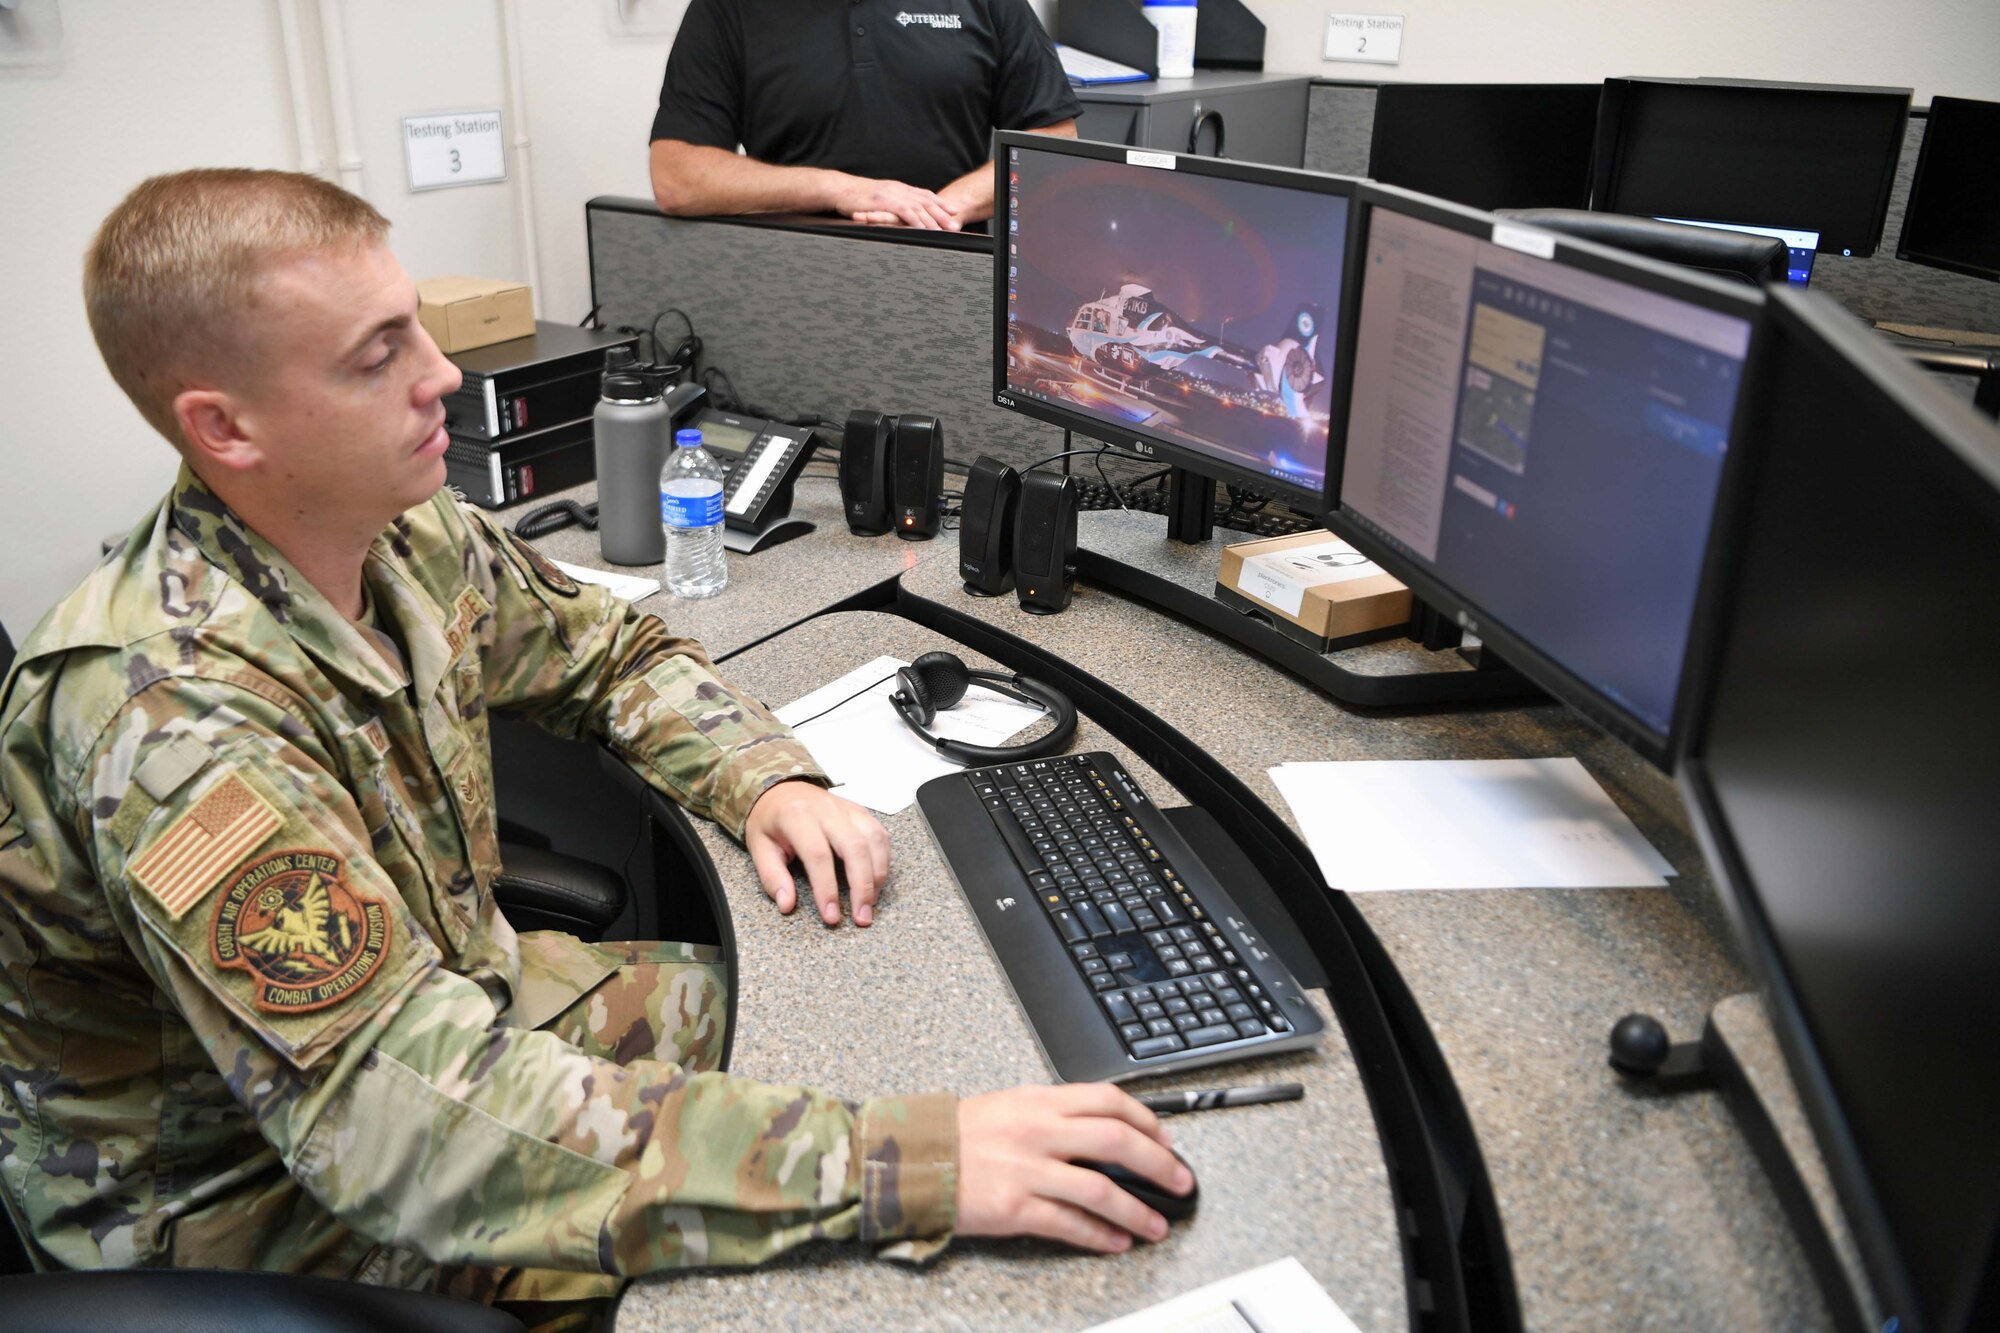 608th AOC personnel monitoring the B-52 route and communications